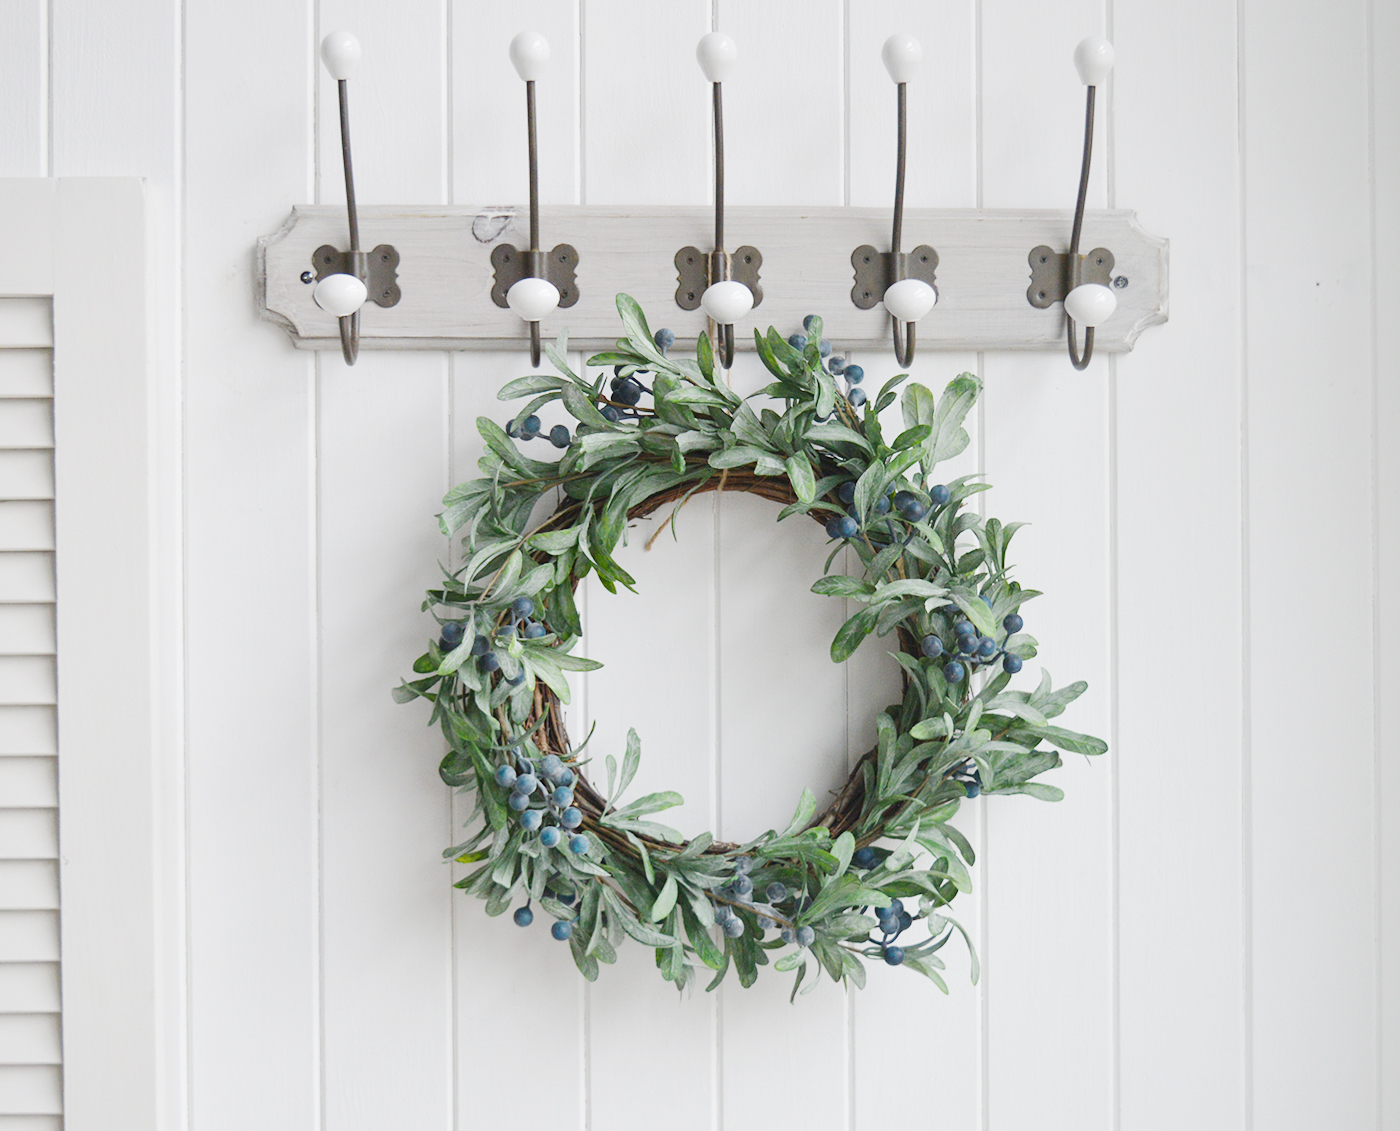 Large Blueberry Wreath for a traditional New England look to your room from The White Lighthouse Coastal and Country Furniture for the hallway, living room, bedroom and bathroom